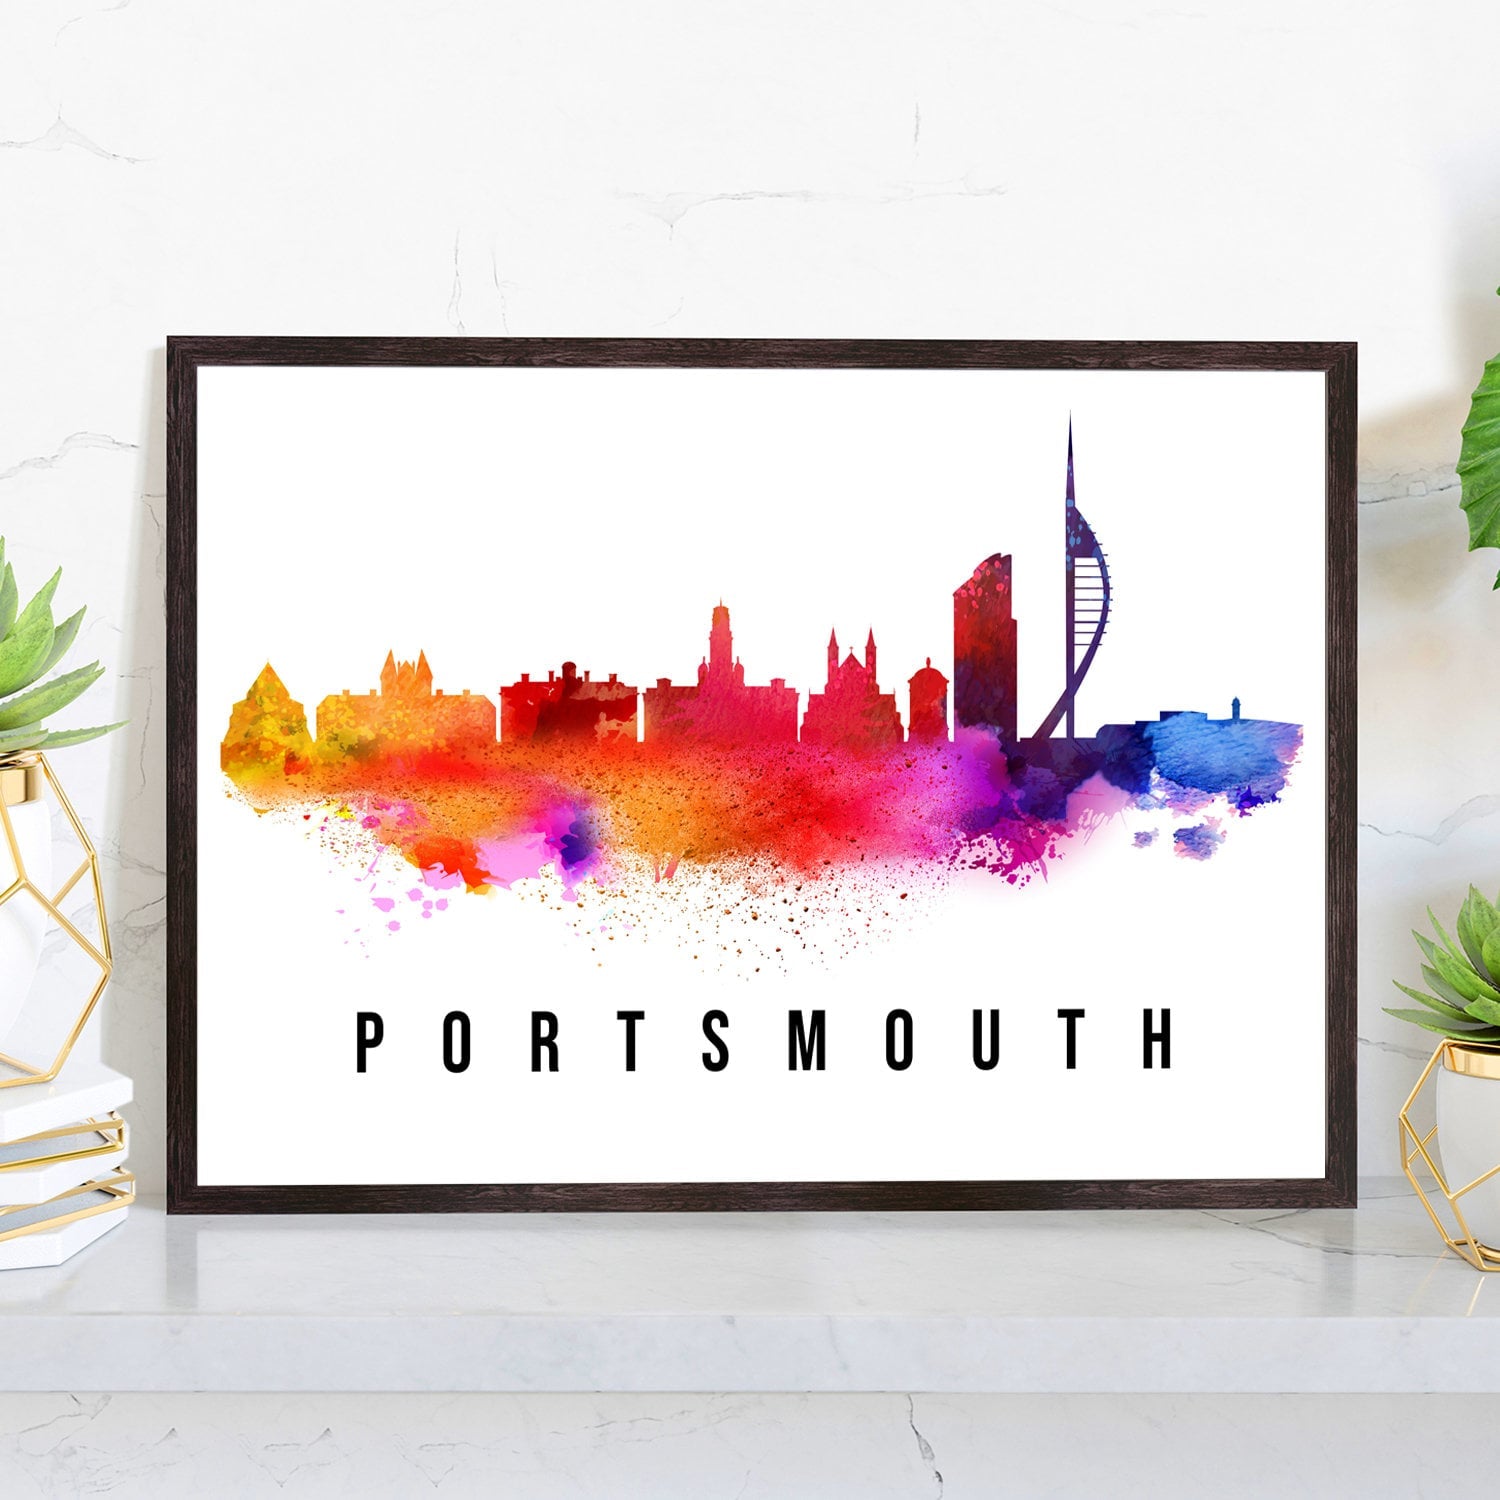 Portsmouth England Poster, Skyline poster cityscape poster, Landmark City Illustration poster, Home wall decoration, Office wall art